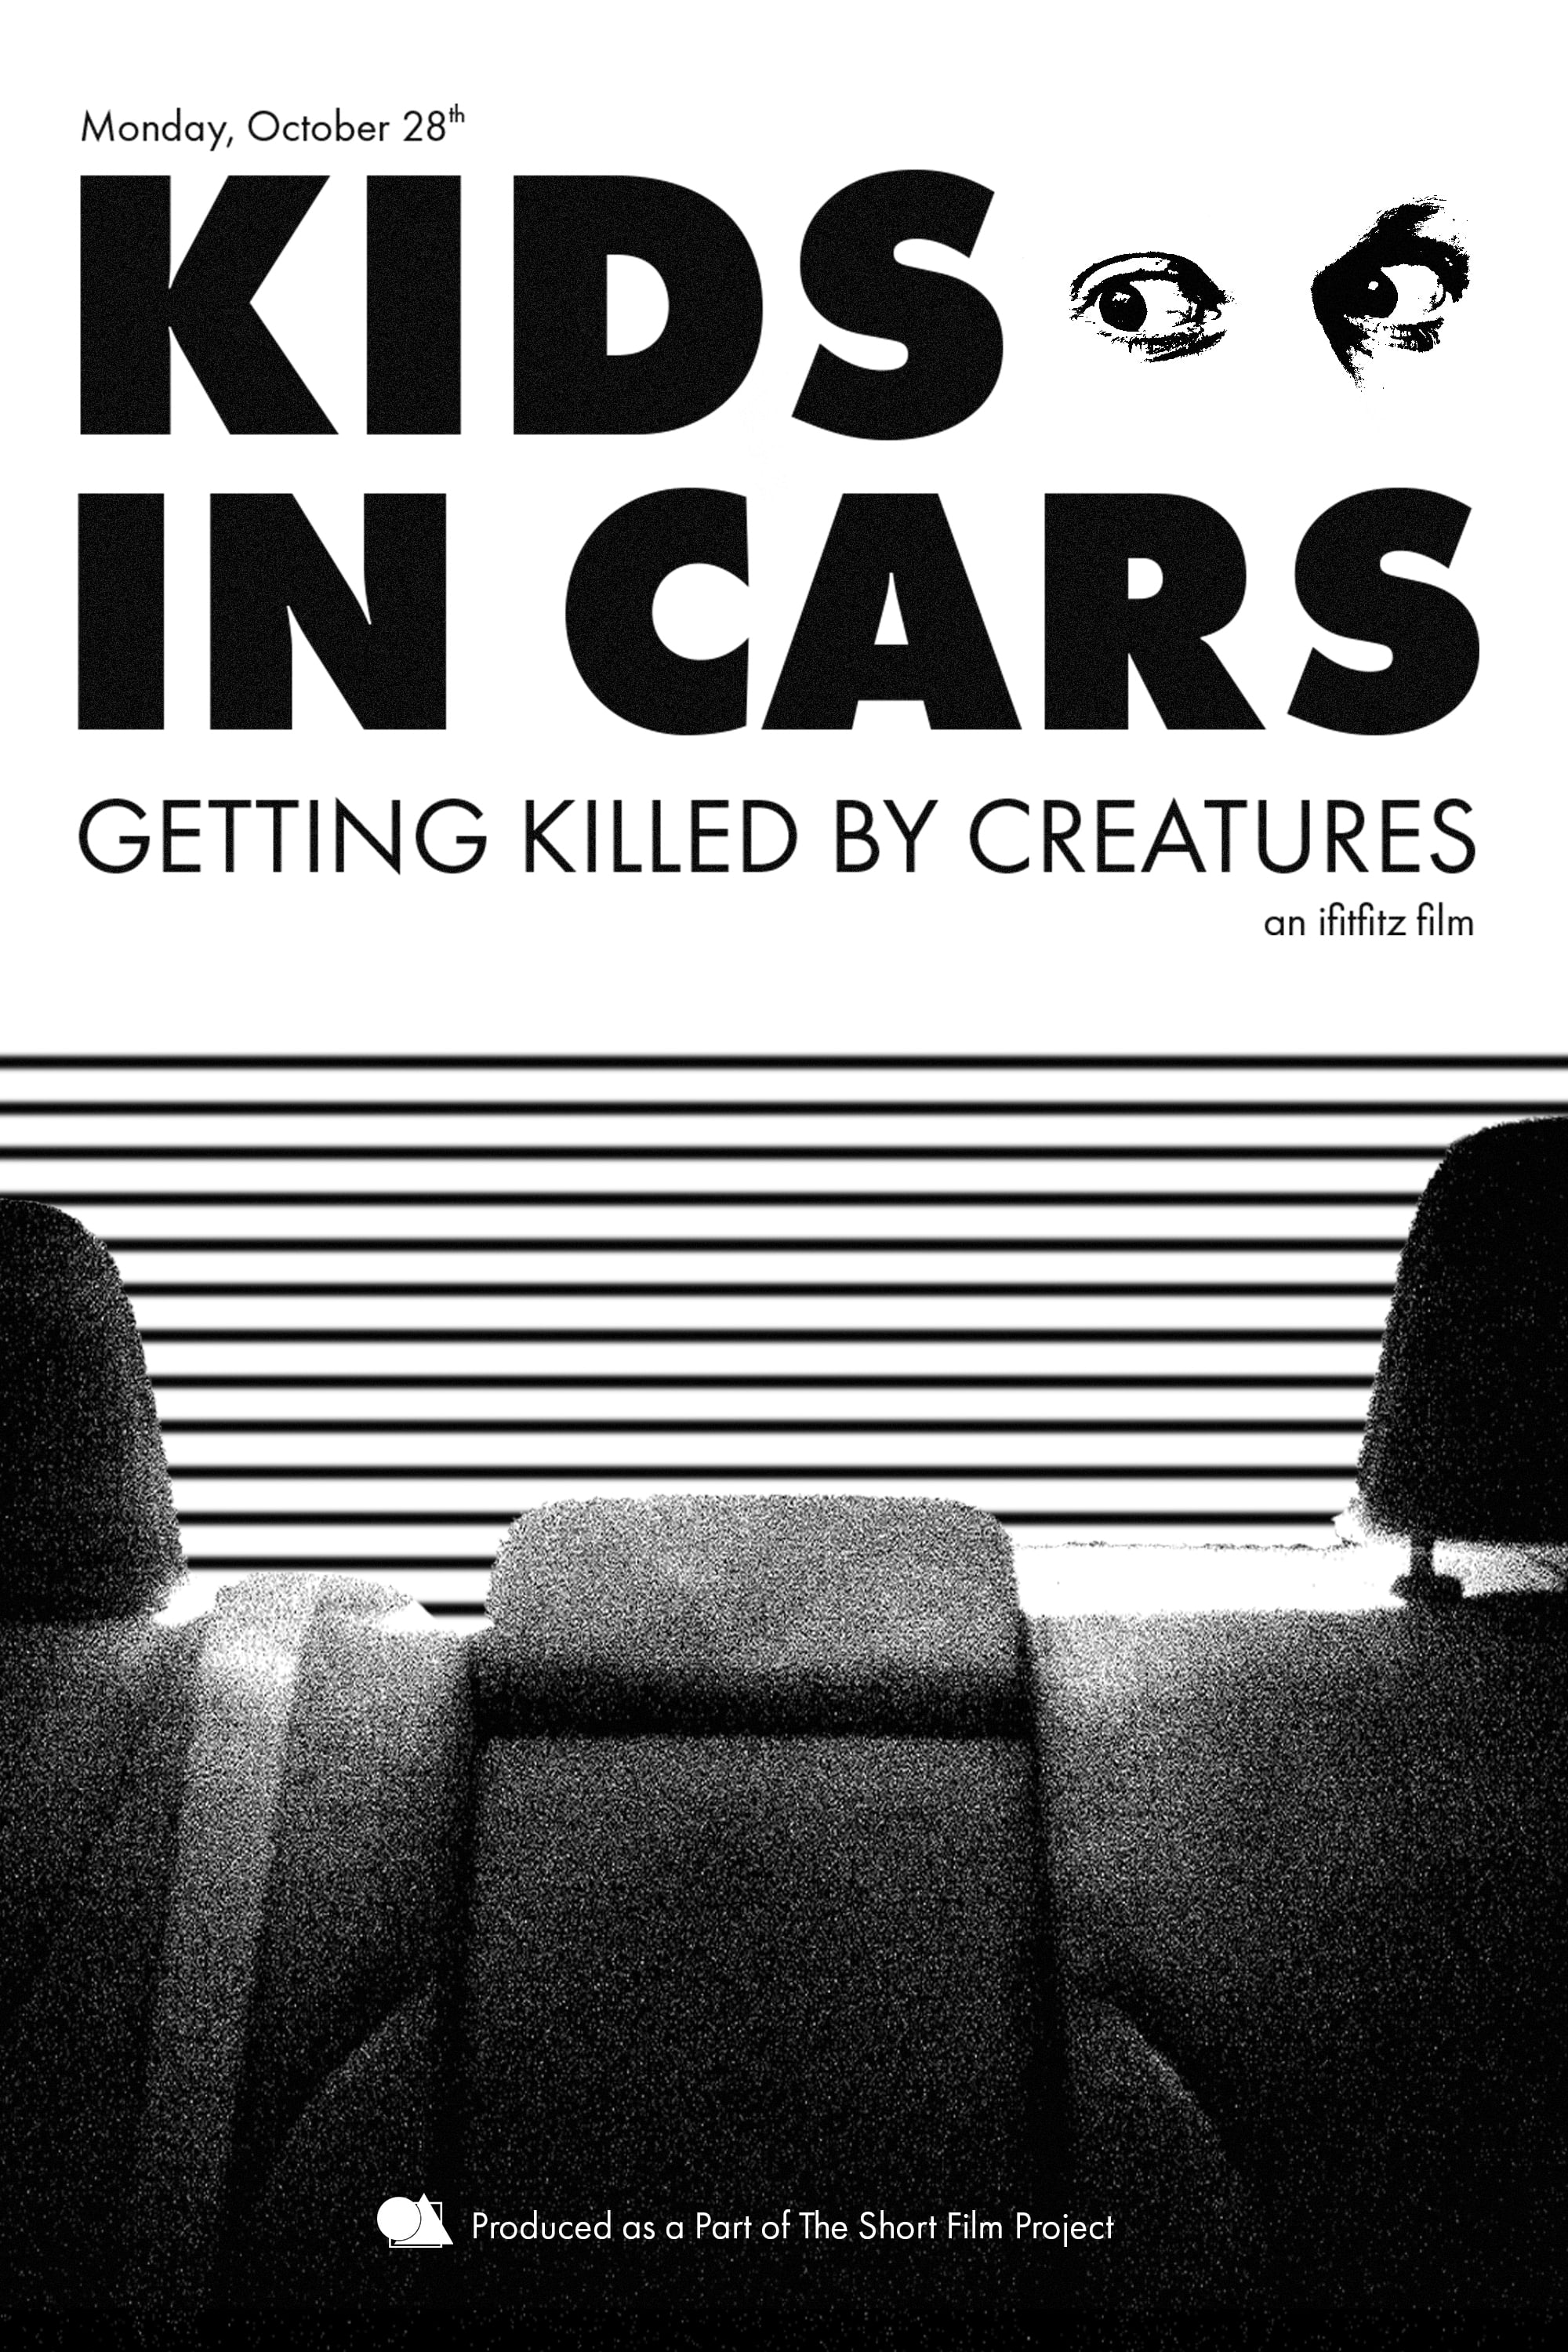 Kids in Cars Getting Killed by Creatures